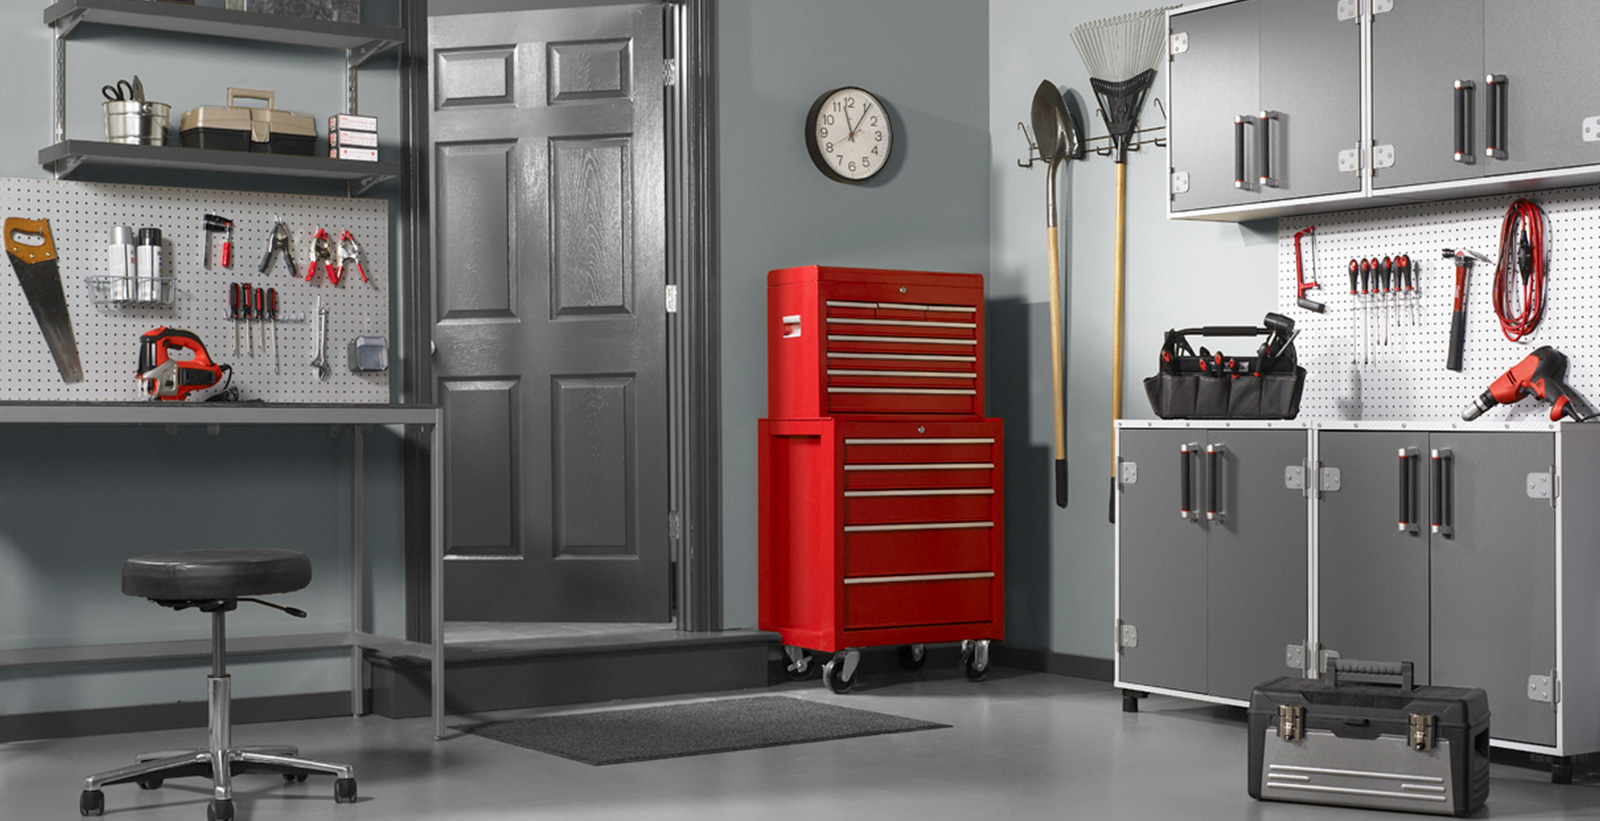 Garage workspace with gray walls and gray trim, red tool chest, versatile and comfortable style.